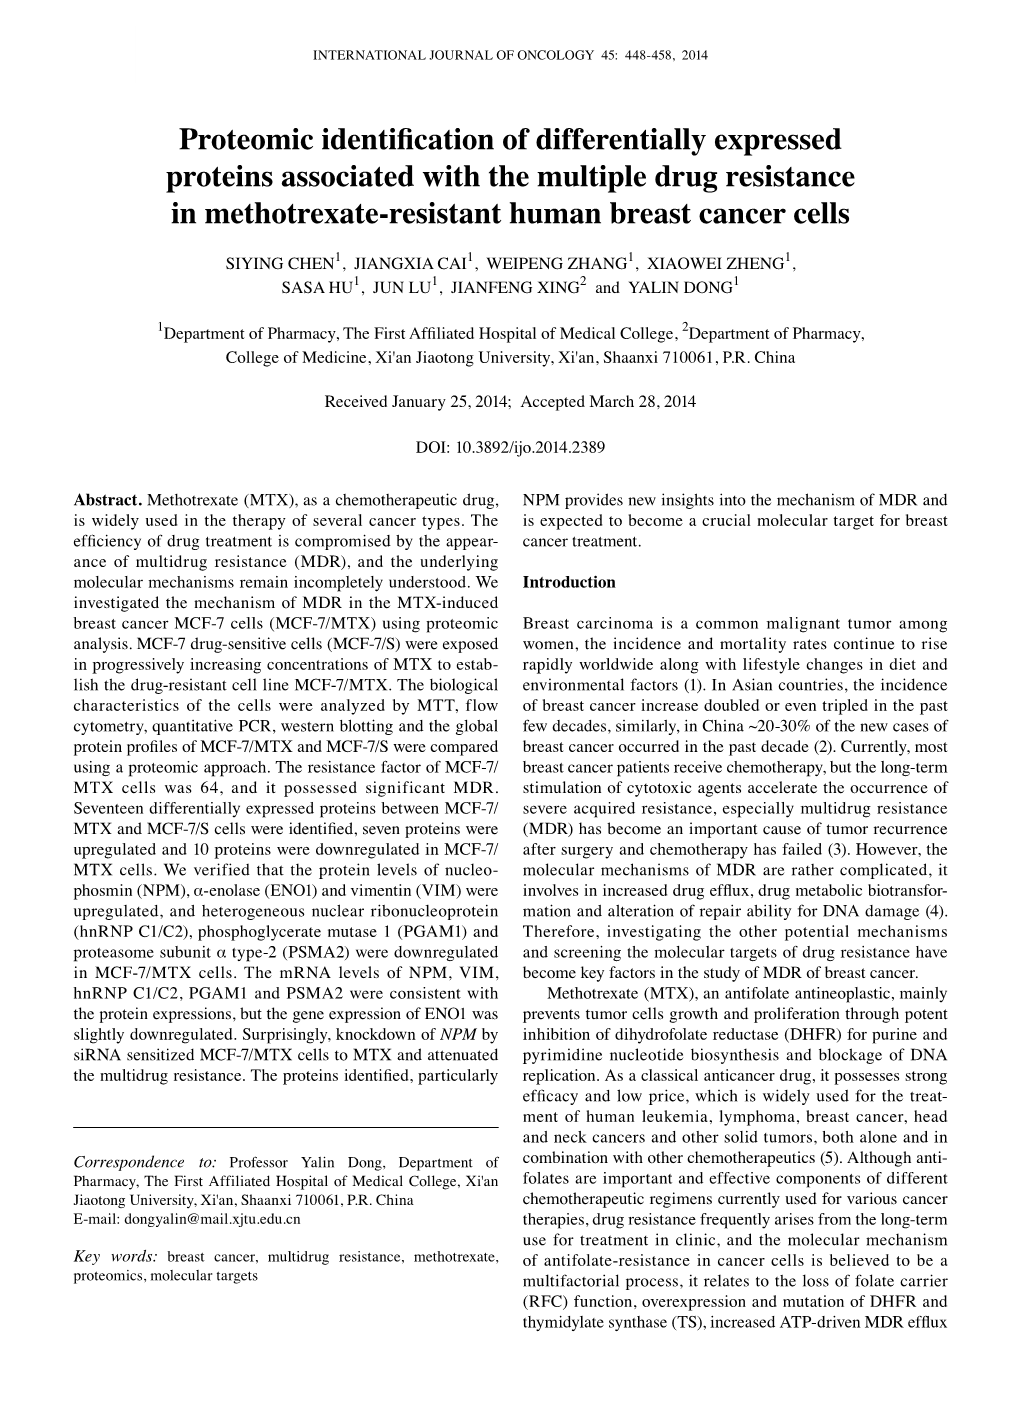 Proteomic Identification of Differentially Expressed Proteins Associated with the Multiple Drug Resistance in Methotrexate-Resistant Human Breast Cancer Cells